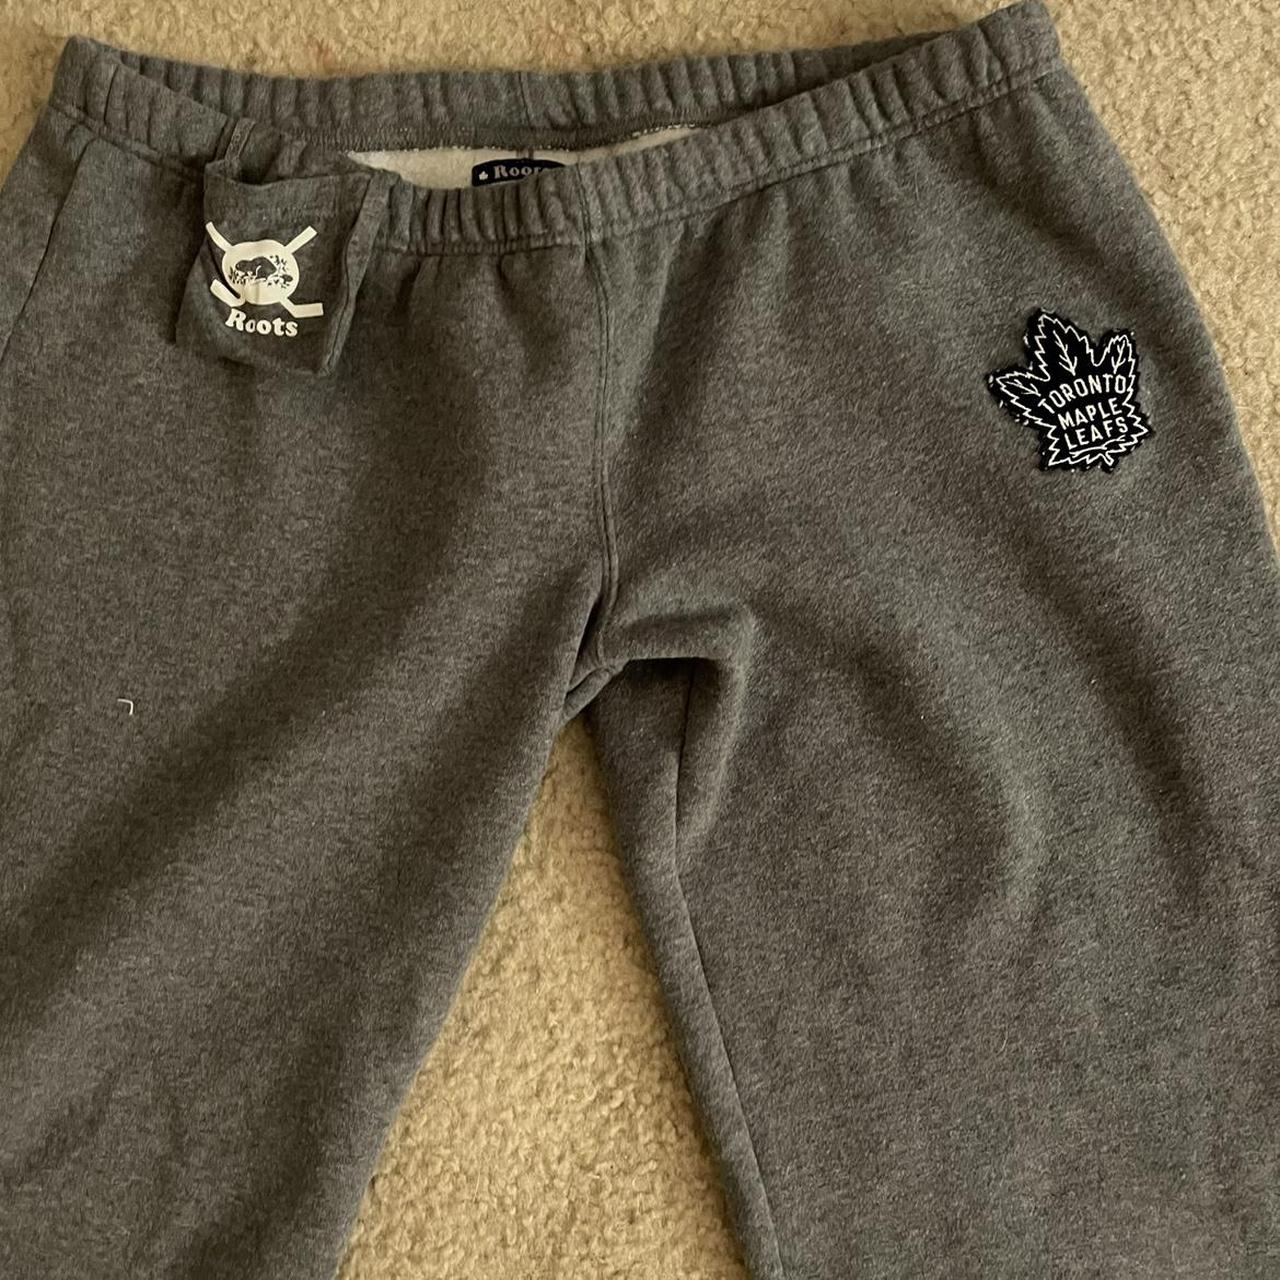 Find more Toronto Maple Leafs Roots Sweat Pants for sale at up to